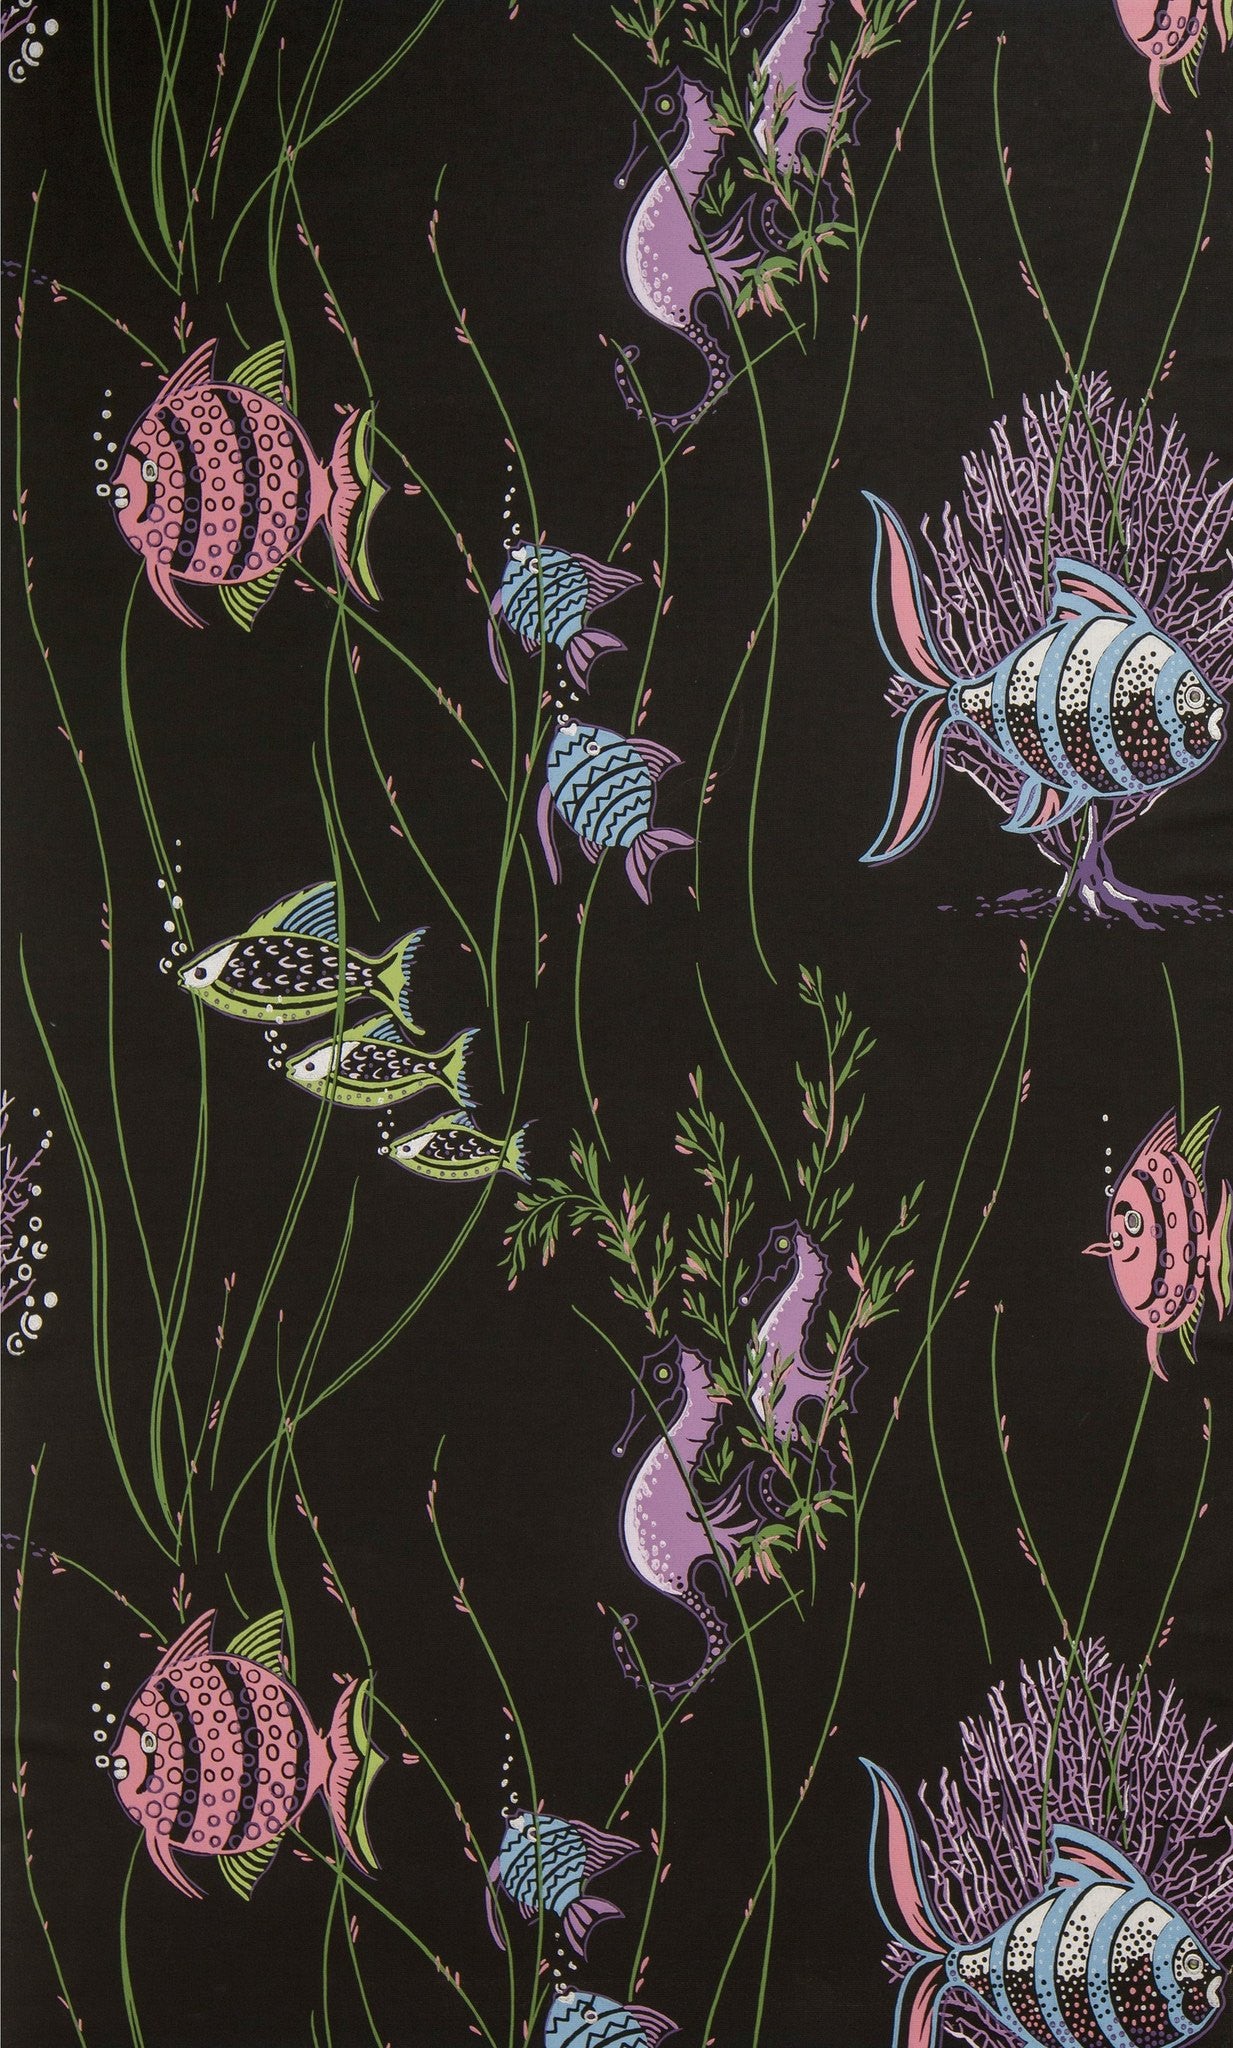 Aquatic Scene with Fish and Seaweed - Vintage Wallpaper Remnant